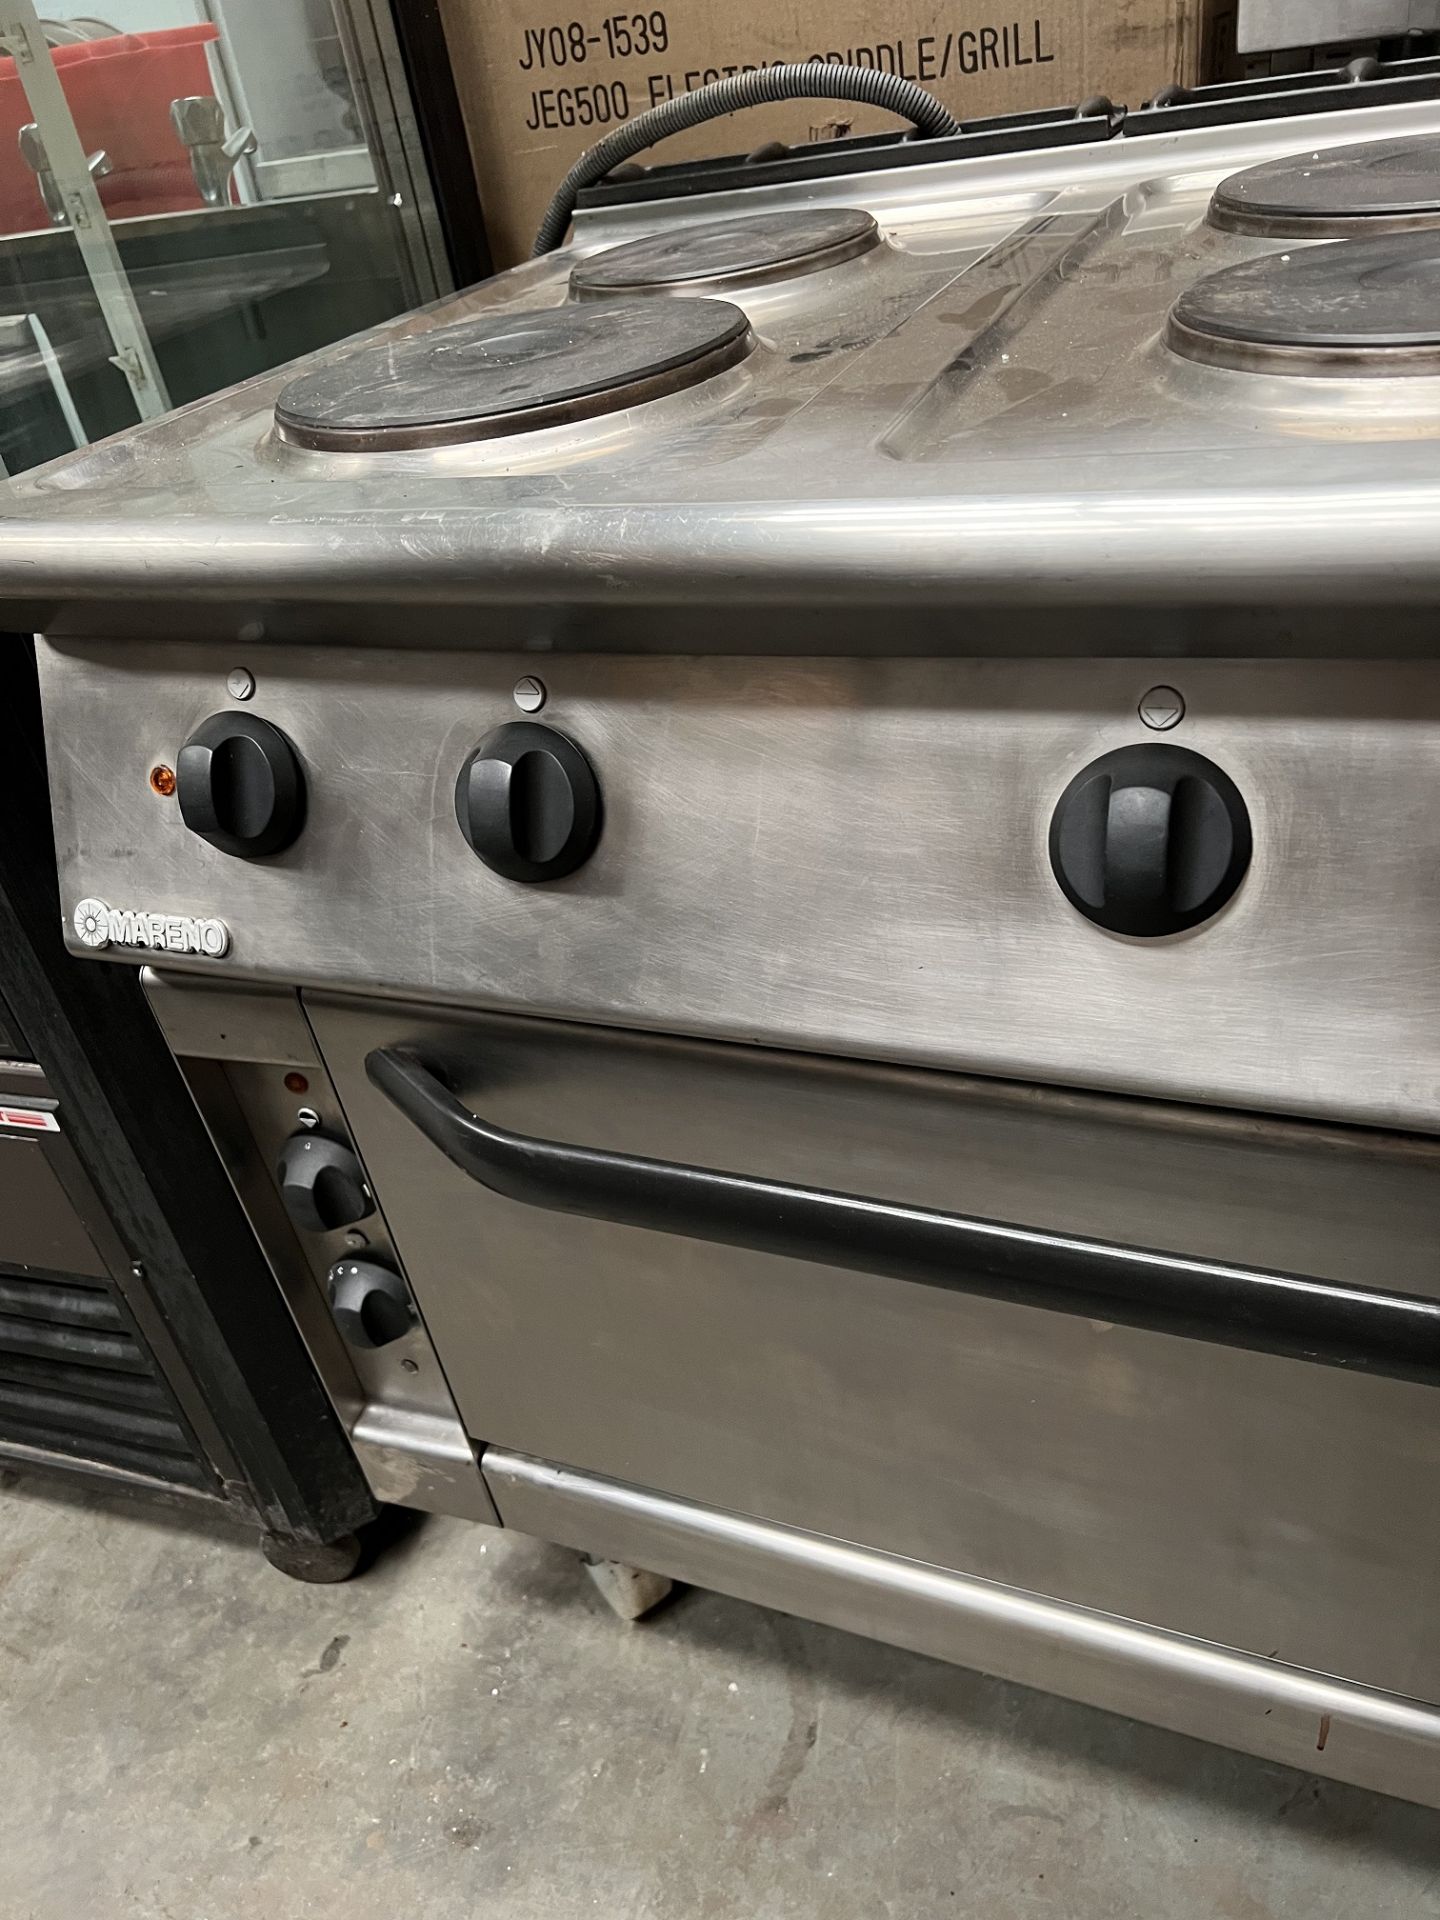 Mareno 4 Ring Electric Oven Range - Image 2 of 3